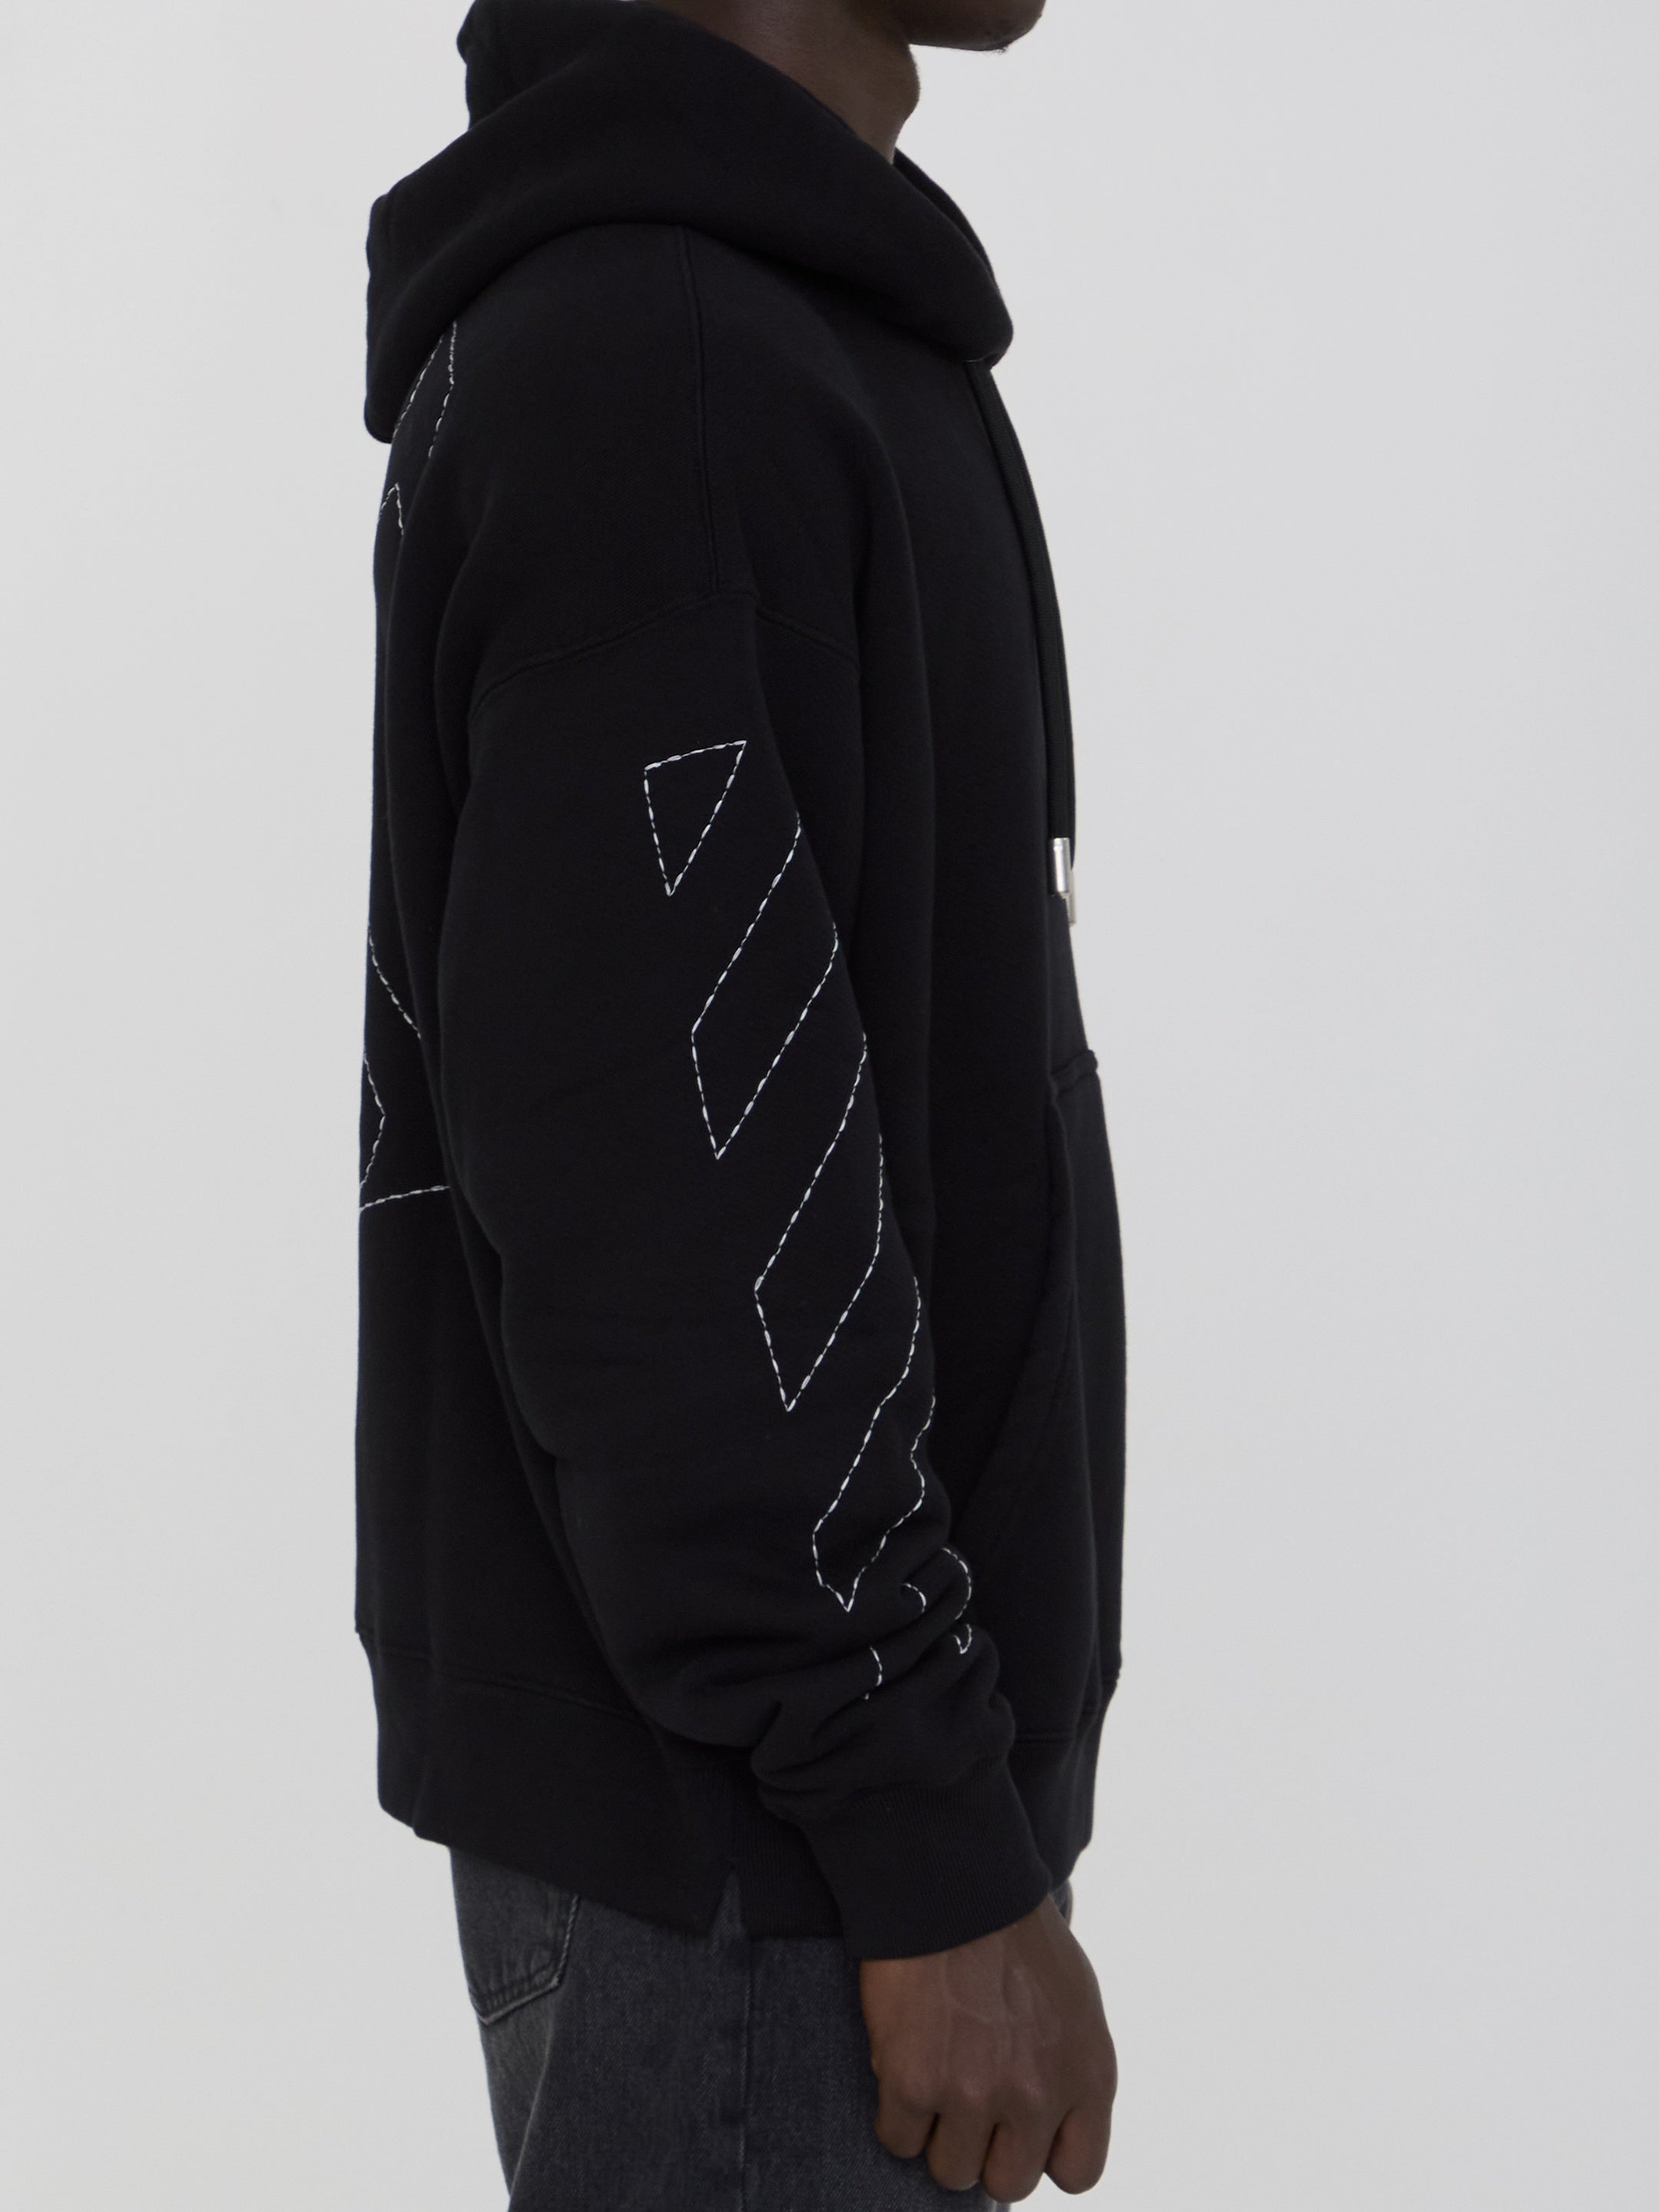 OFF-WHITE-OUTLET-SALE-Stitch-Arrow-Skate-hoodie-Strick-ARCHIVE-COLLECTION-3.jpg